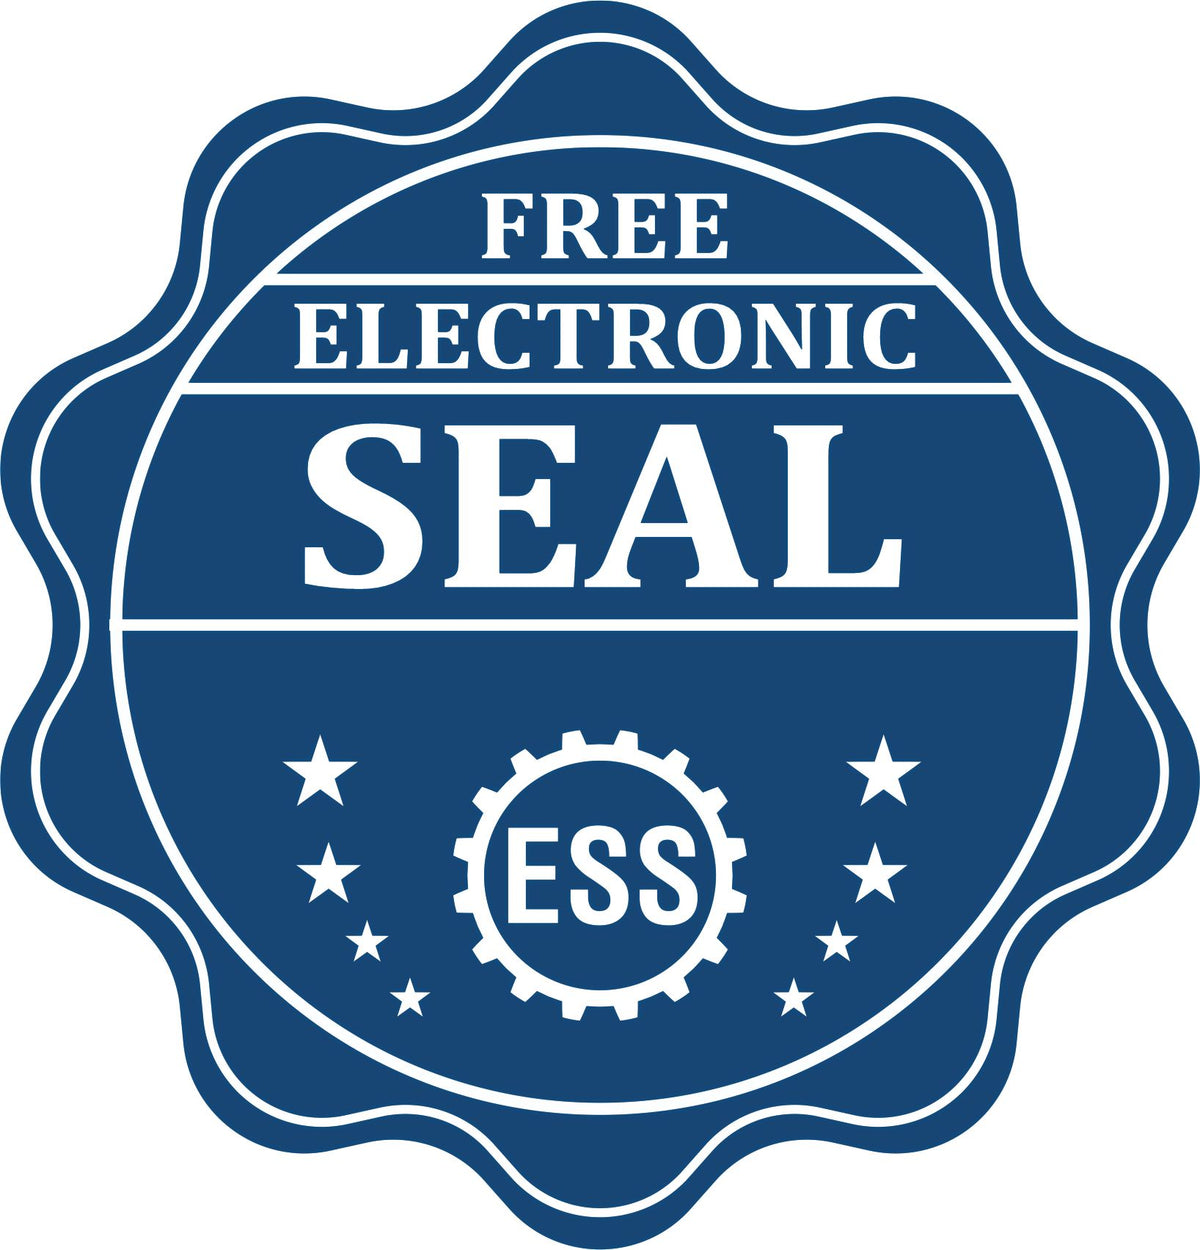 A badge showing a free electronic seal for the Gift Hawaii Land Surveyor Seal with stars and the ESS gear on the emblem.